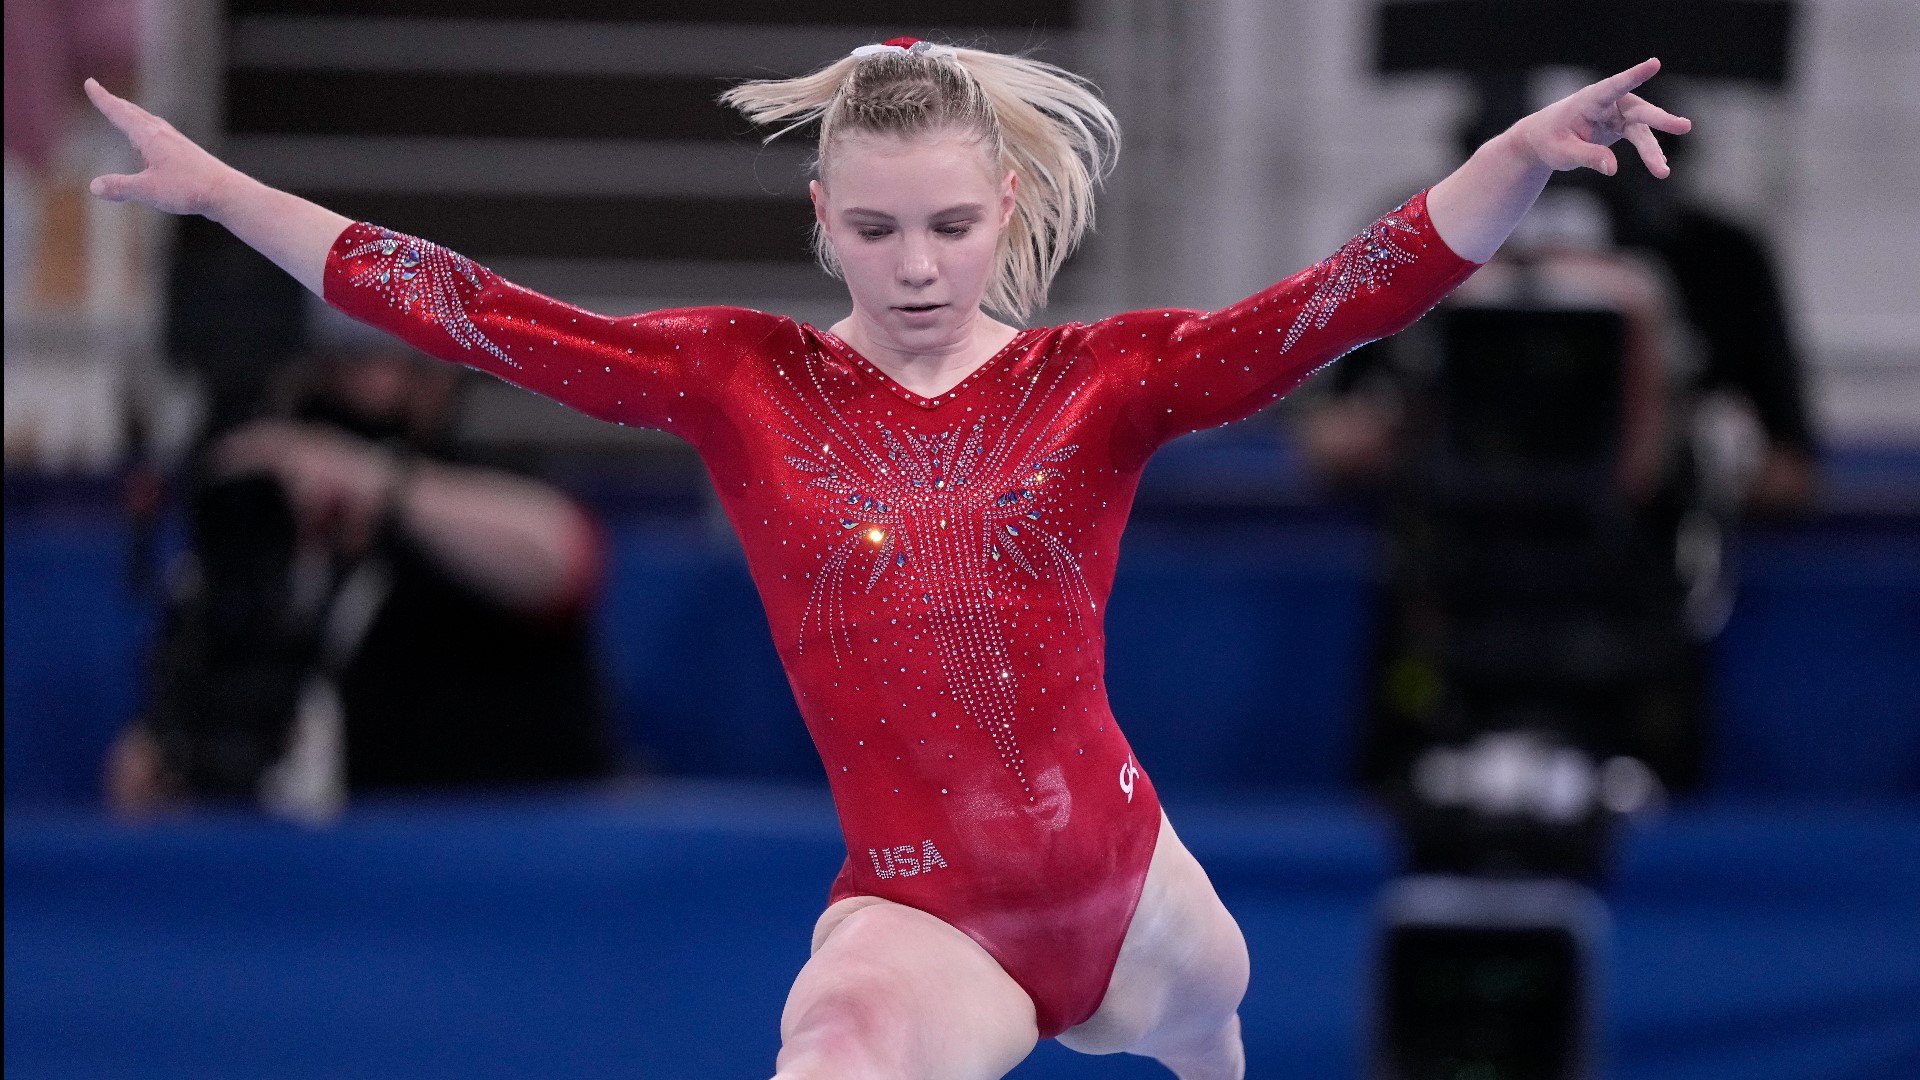 It's the start of track & field events, several big volleyball games and two US women will try to get gold in the women's gymnastics all-around.